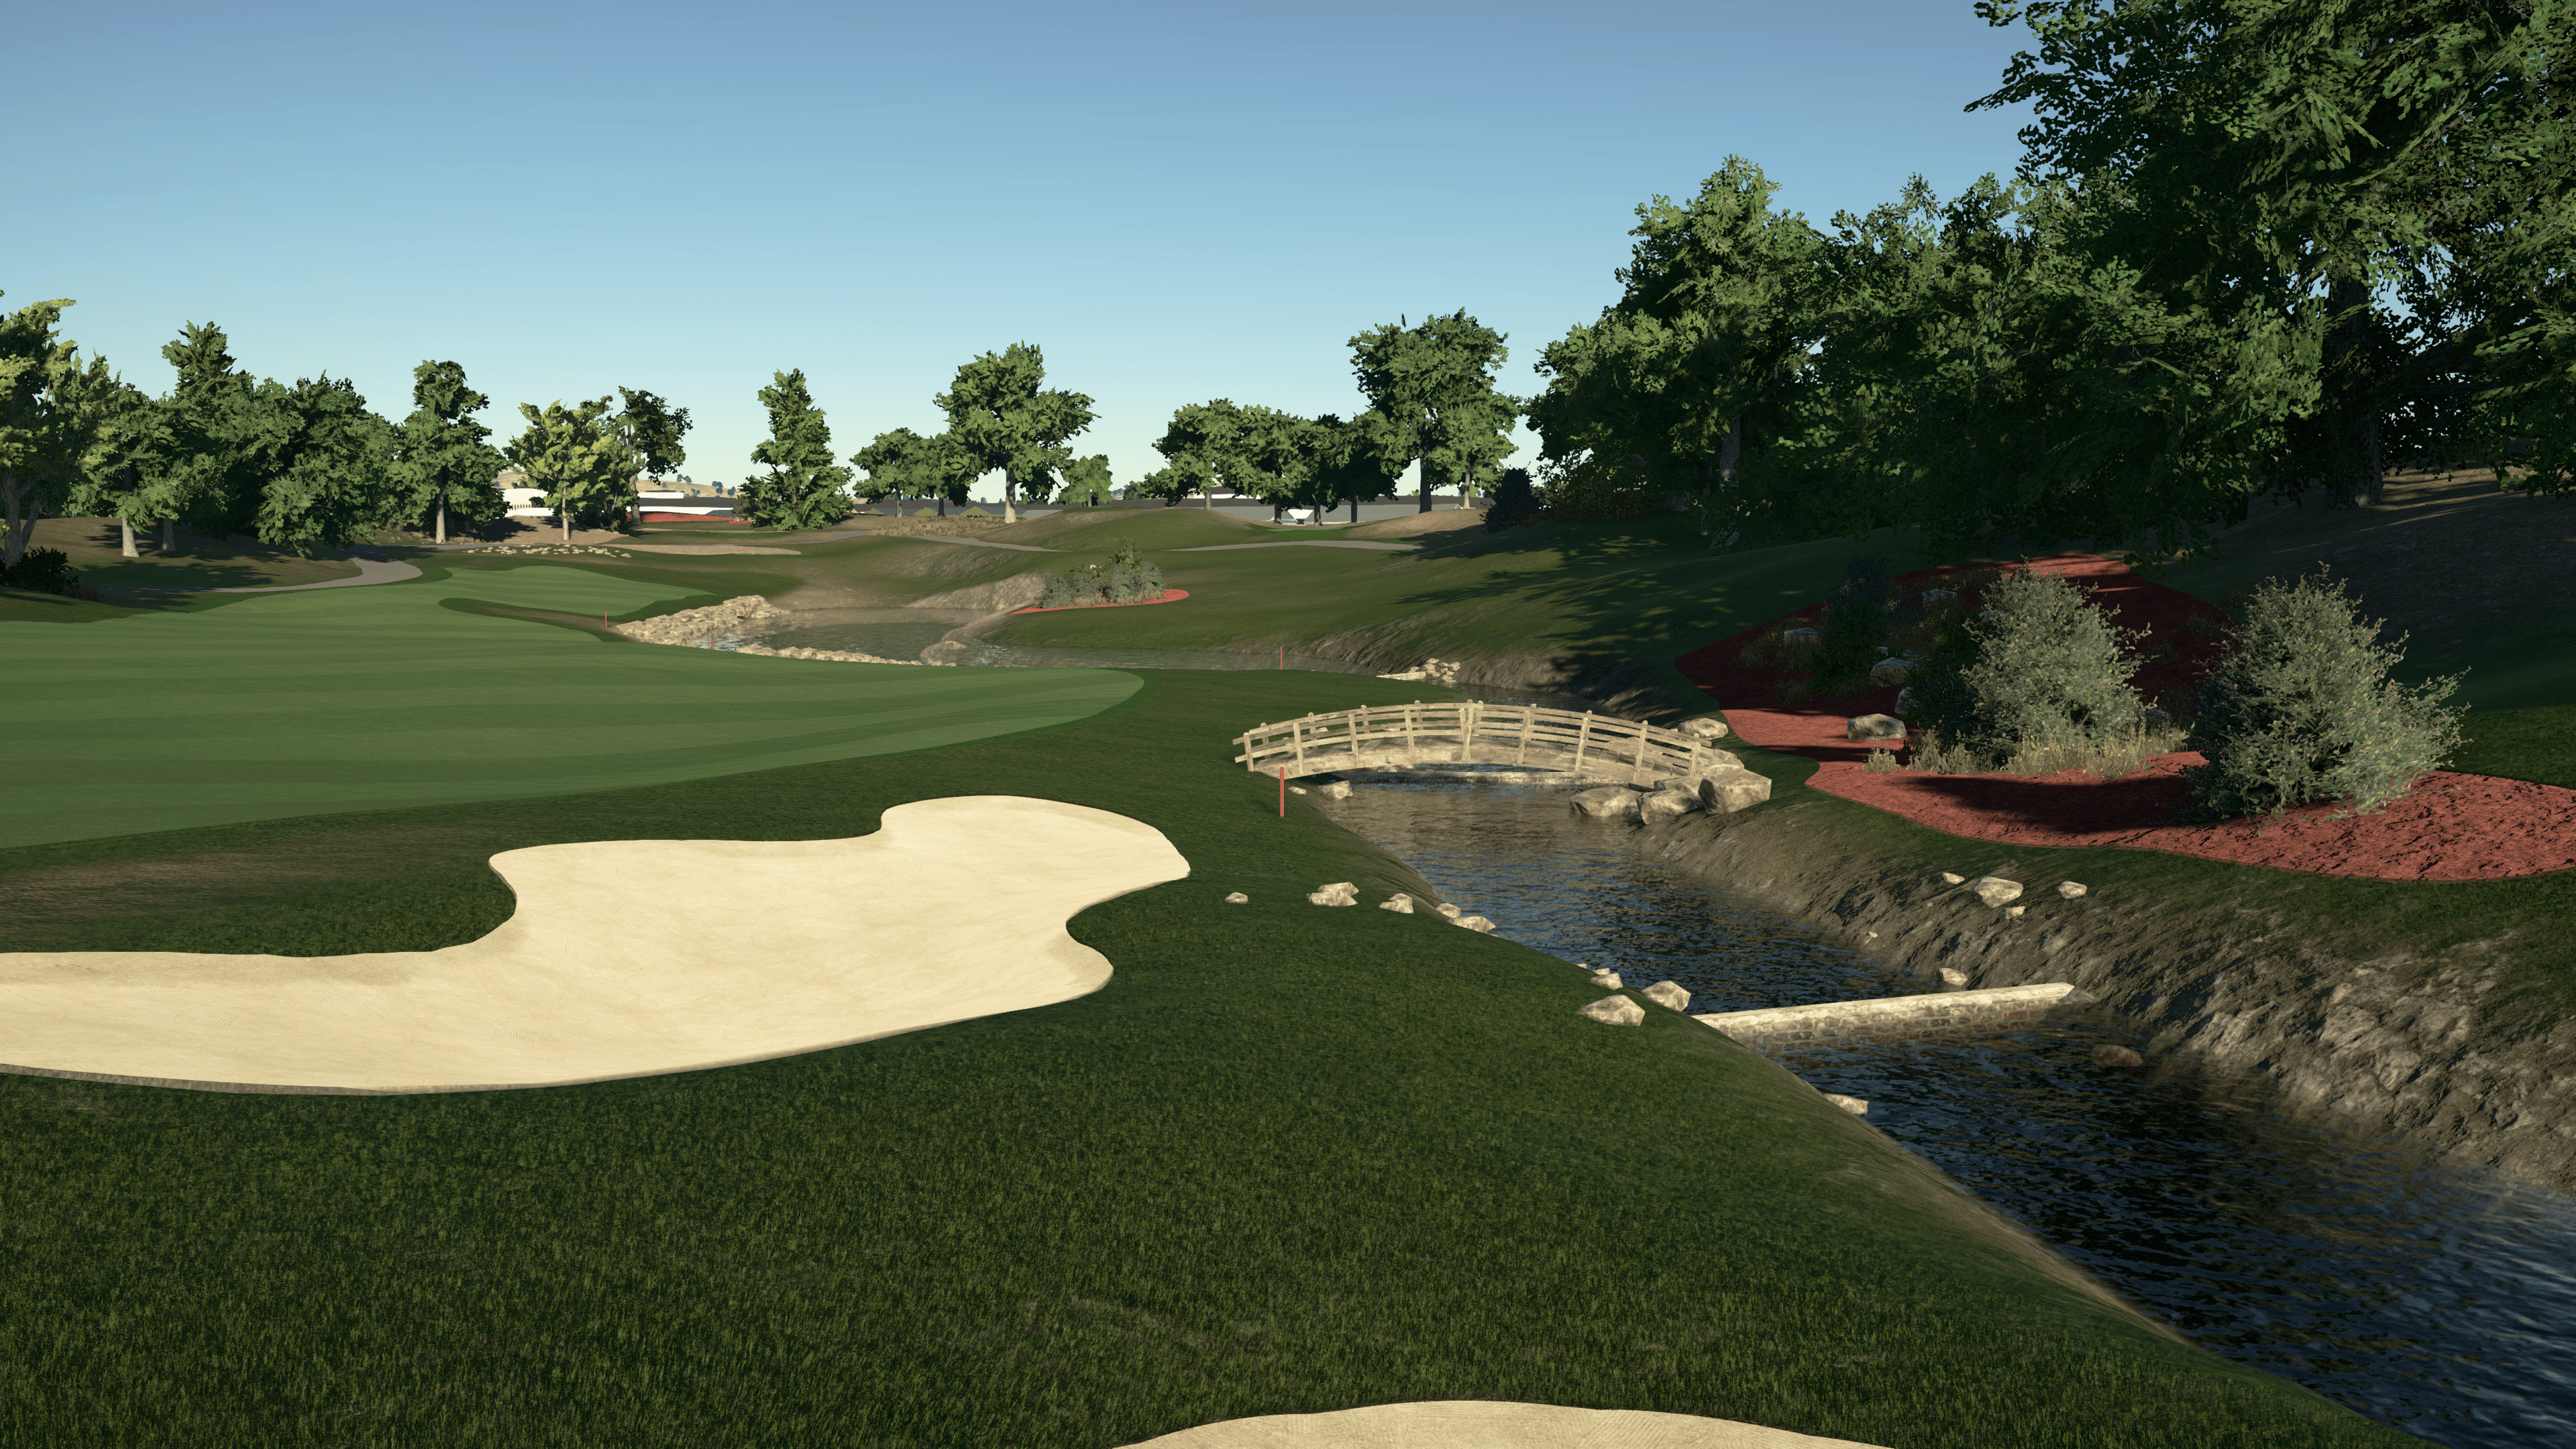 Golf Course: Shadow Creek, A field consisting of a tee box, a fairway, the rough, and other hazards. 3840x2160 4K Background.